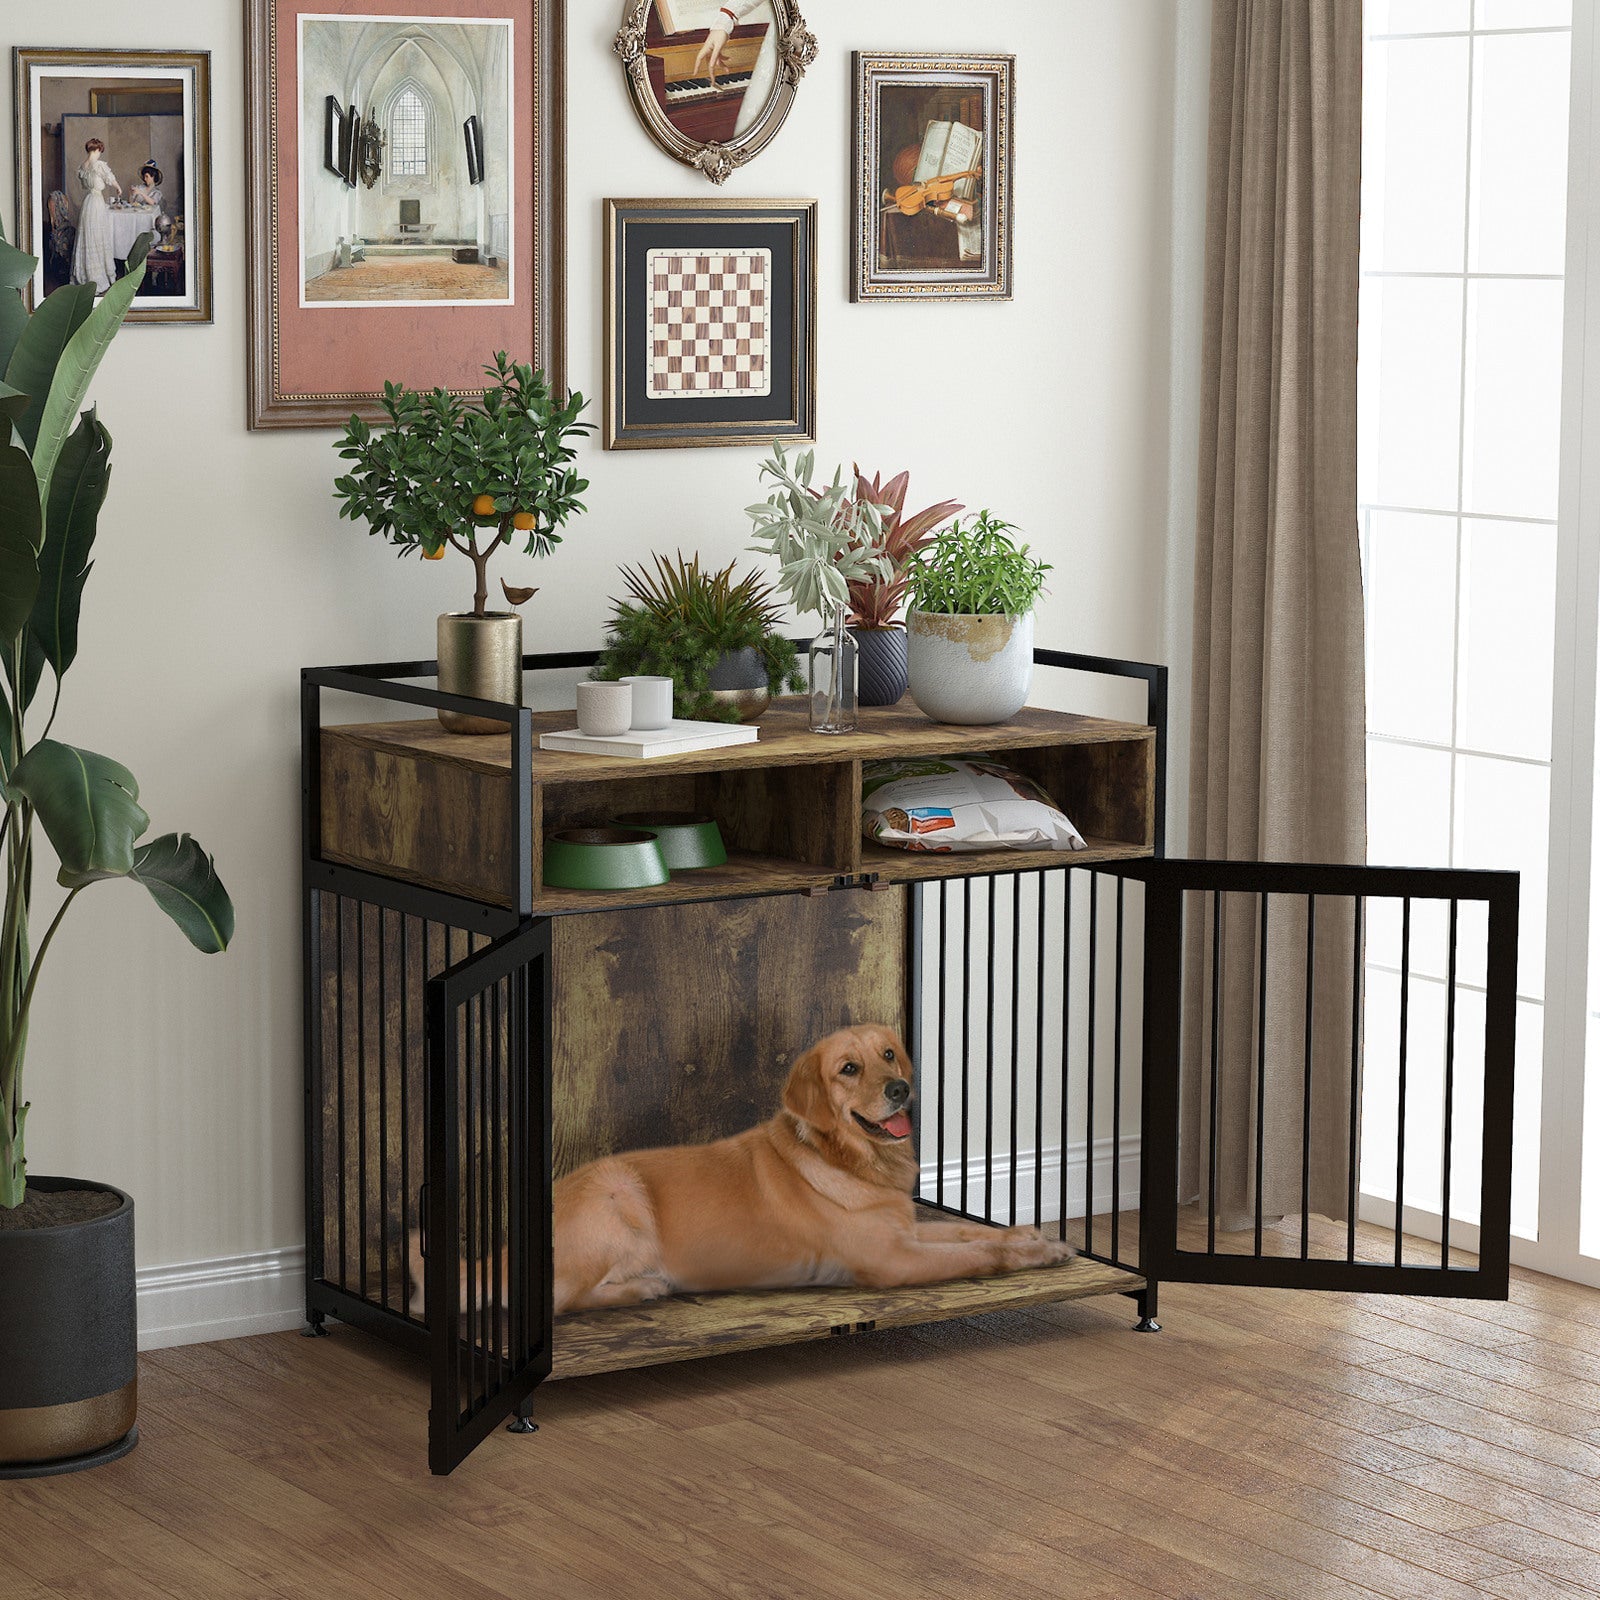 GDLF Dog Crate Furniture-Style Indoor Heavy Duty Kennel with Storage and Anti-Chew